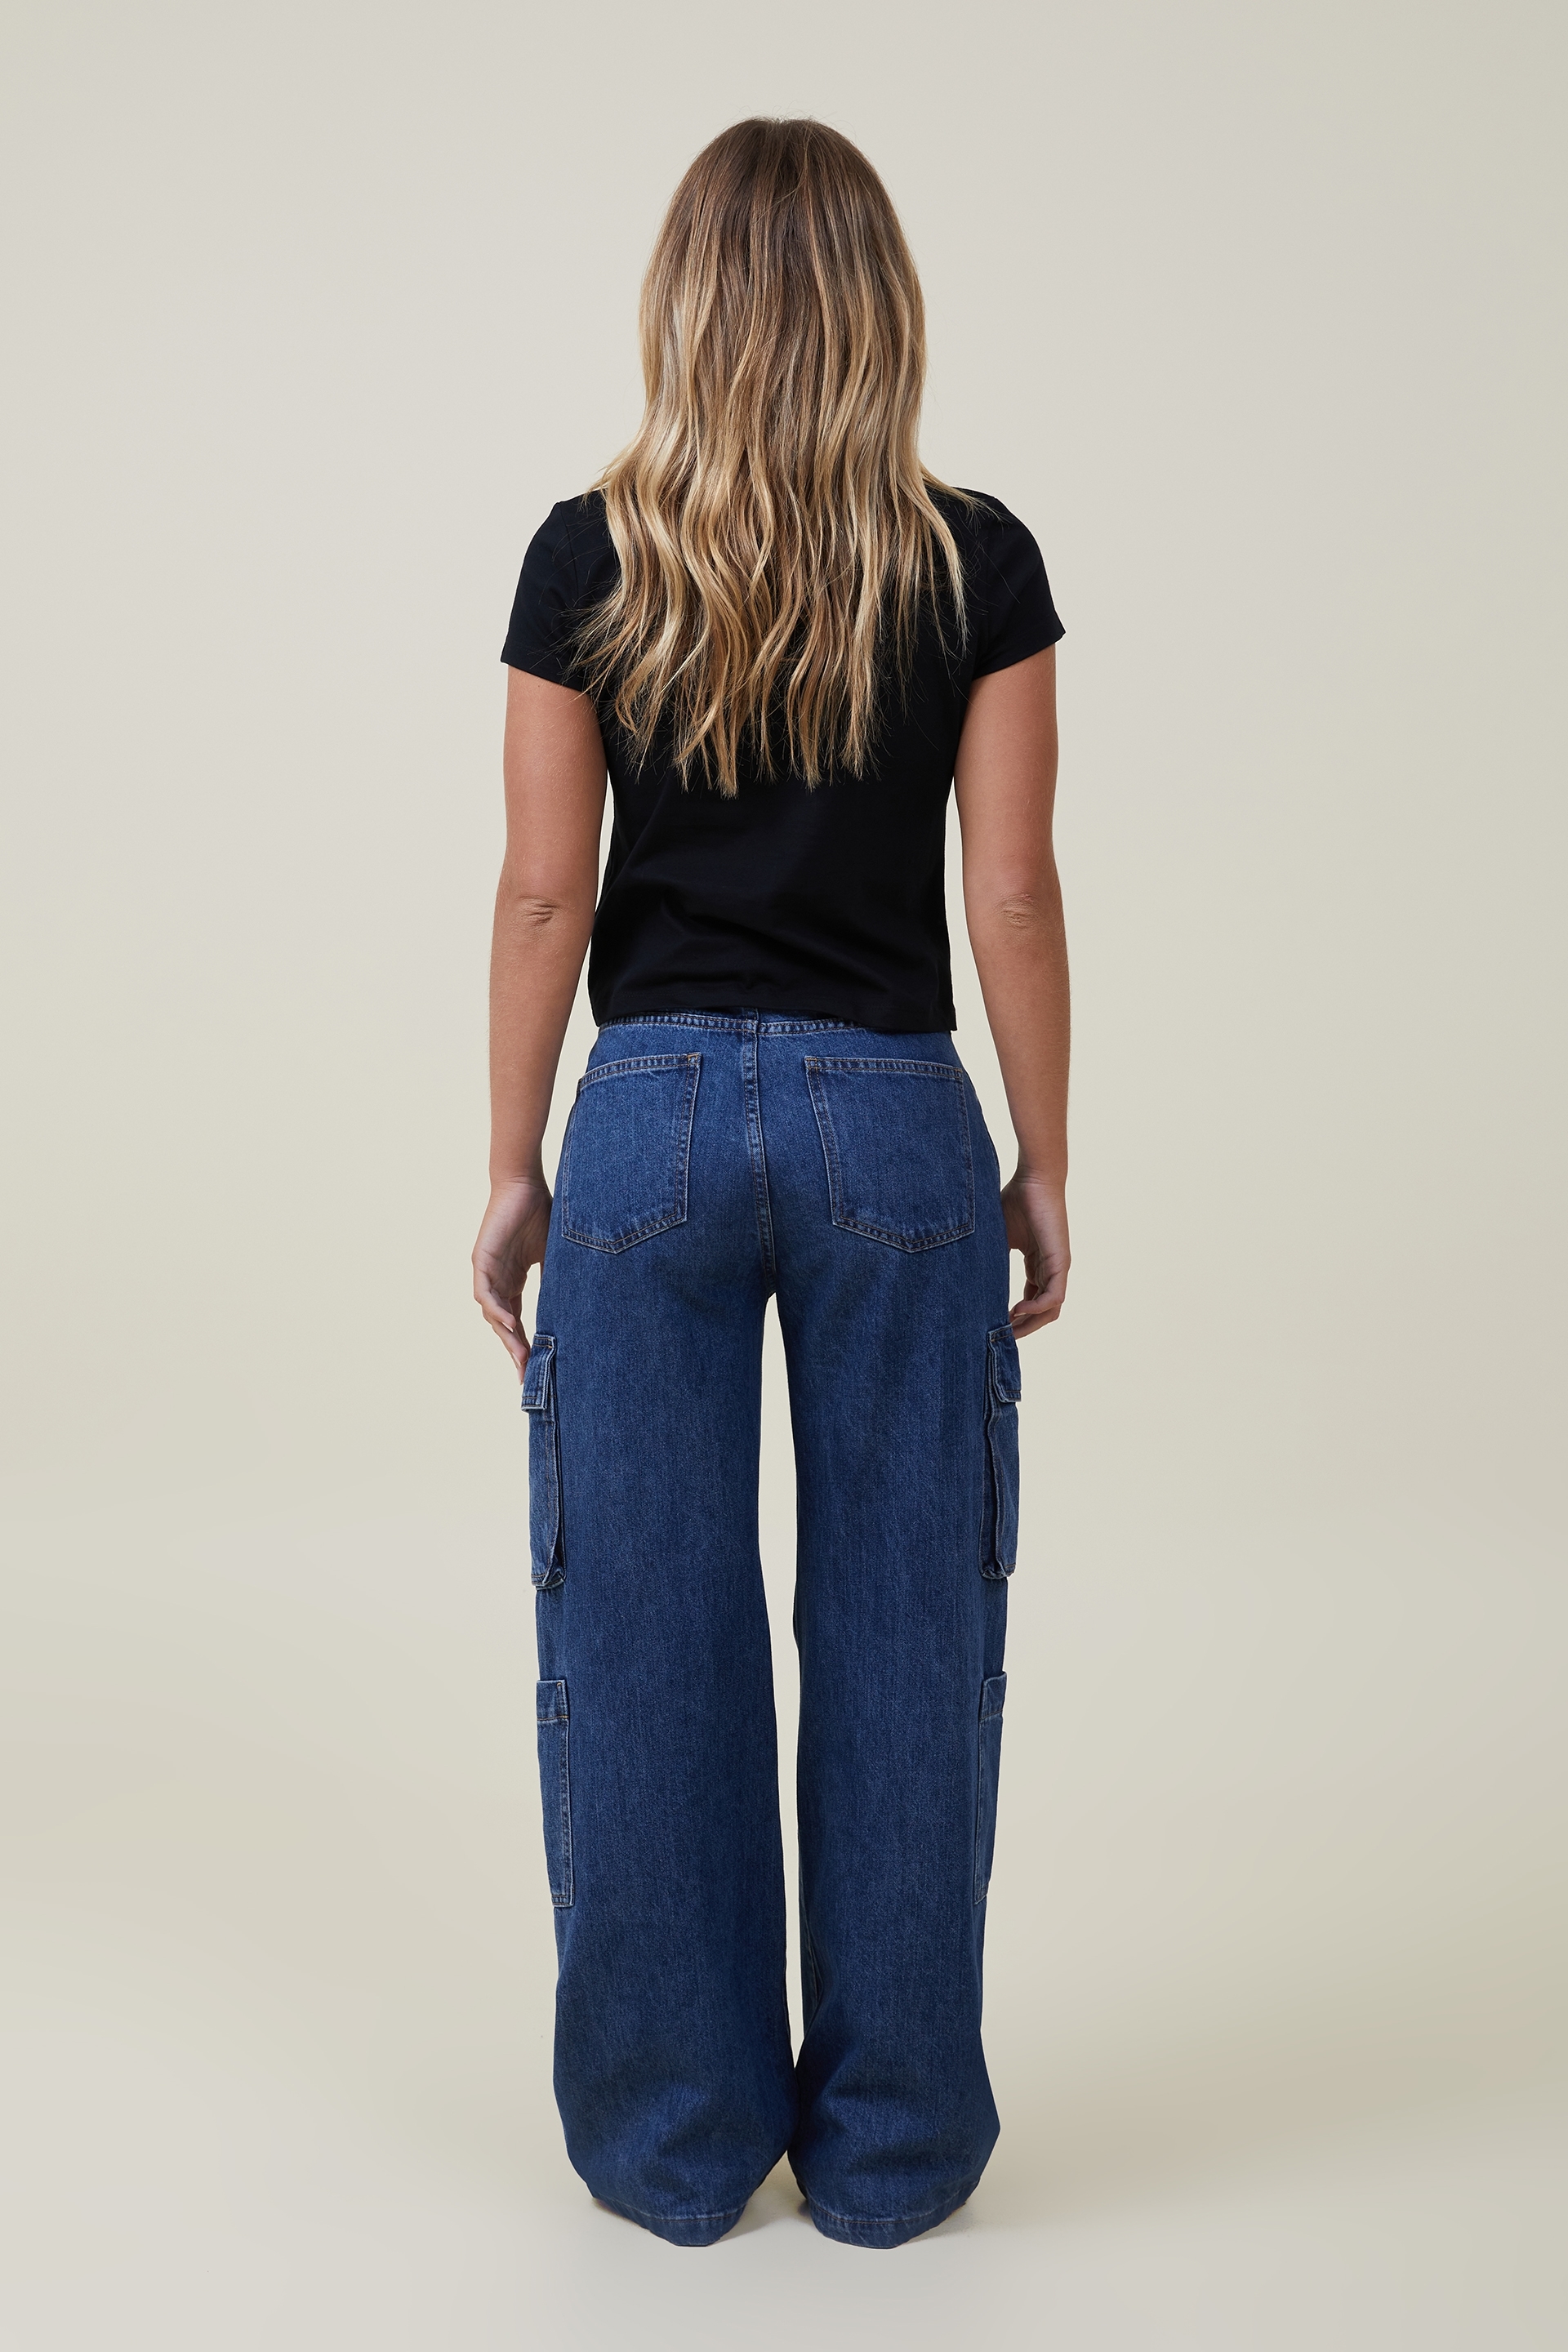 Push Up Jeans Nordico